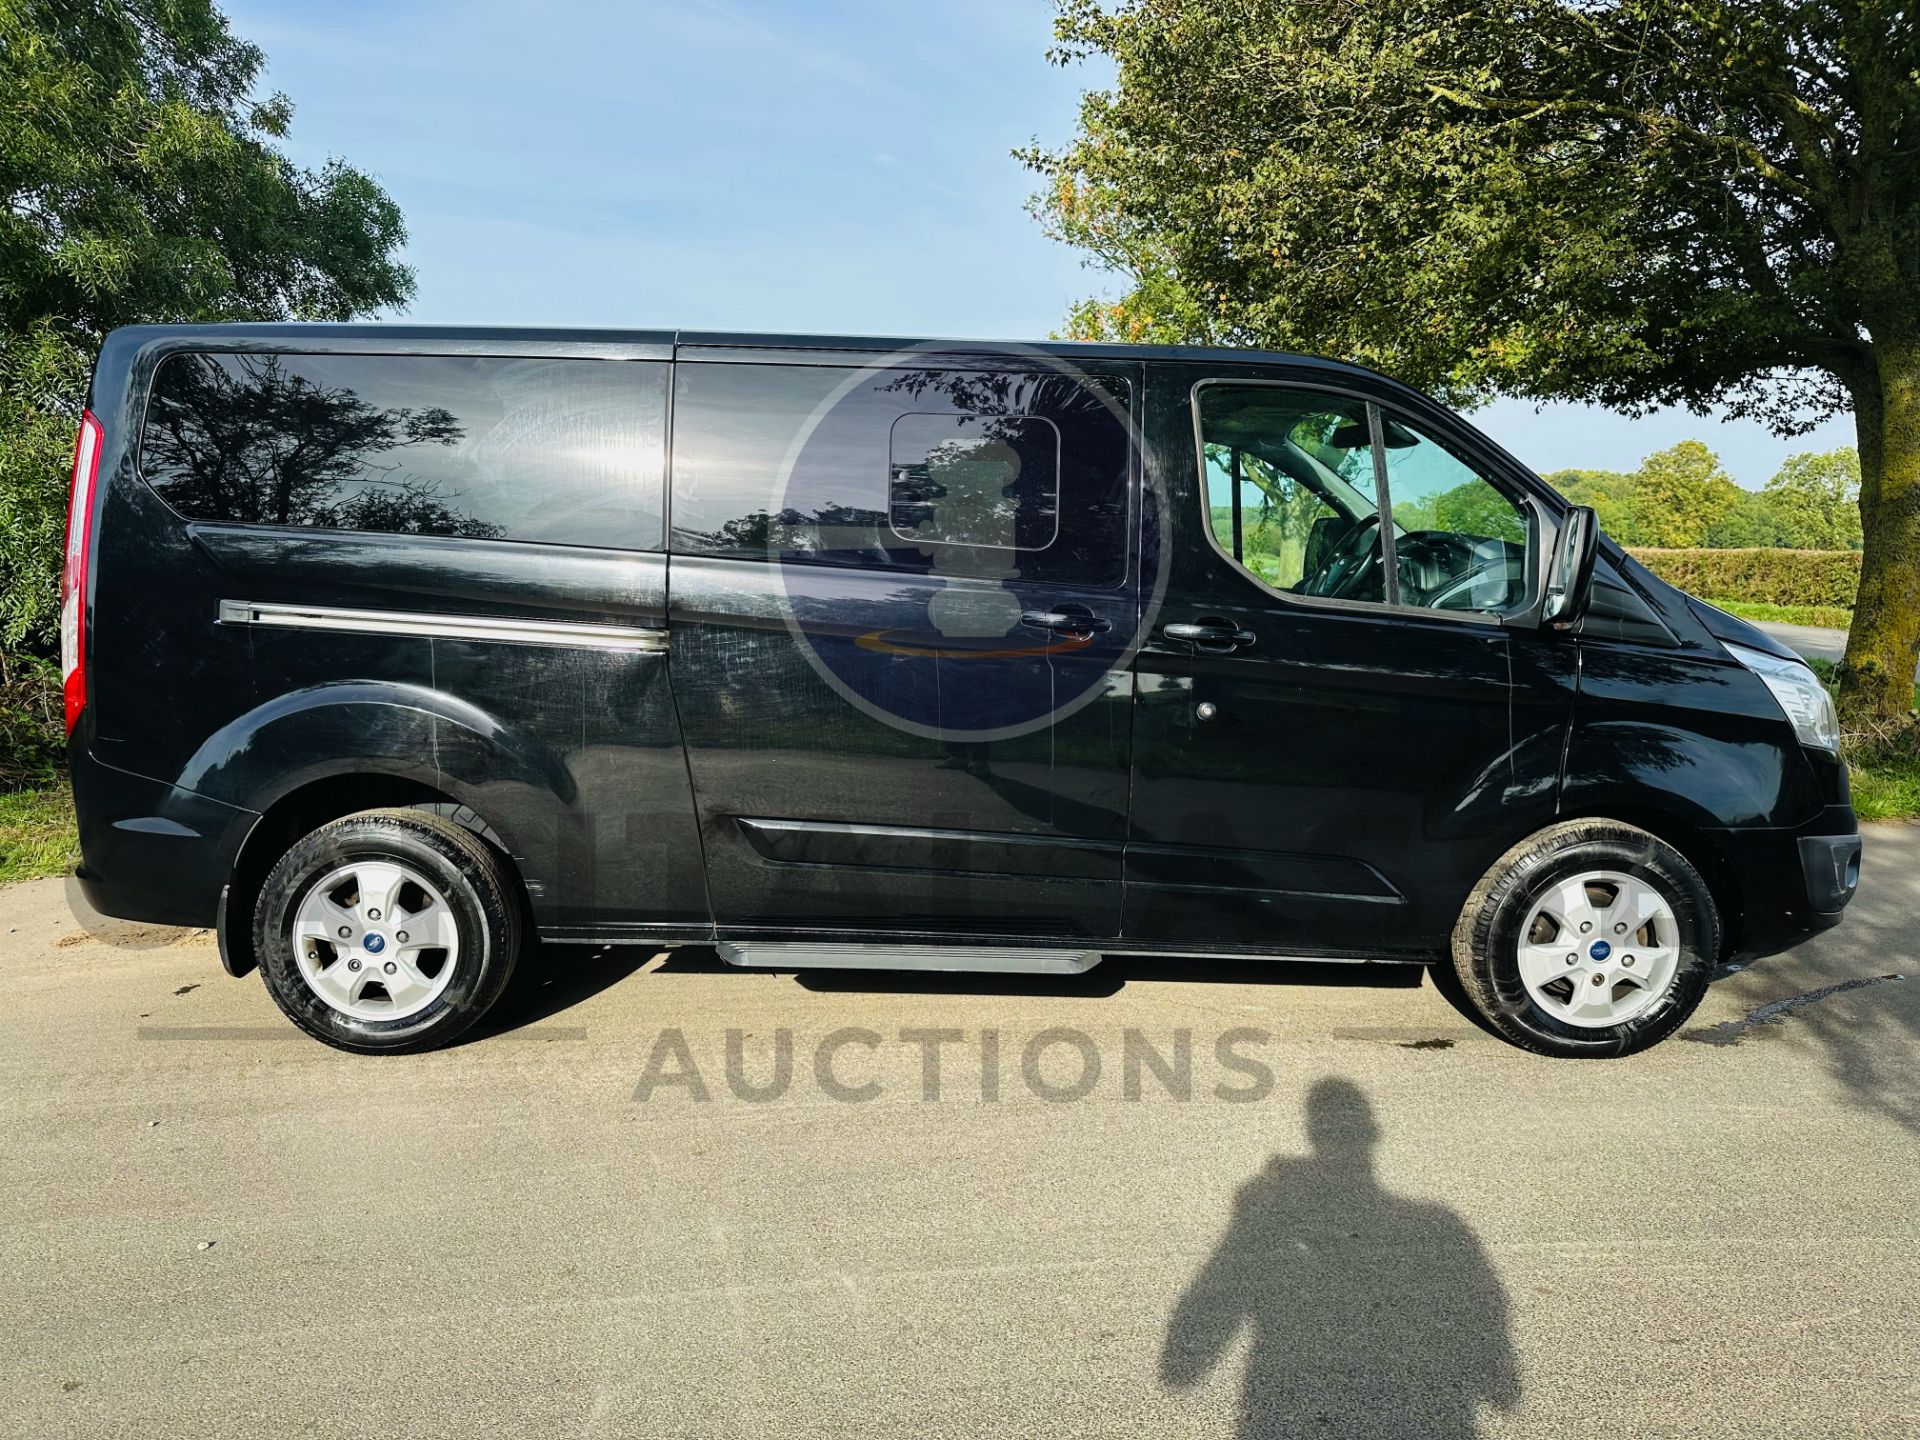 (On Sale) FORD TRANSIT TOURNEO CUSTOM *LWB 9 SEATER BUS* (2018 - EURO 6) 2.0 TDCI - AUTO (1 OWNER) - Image 15 of 42